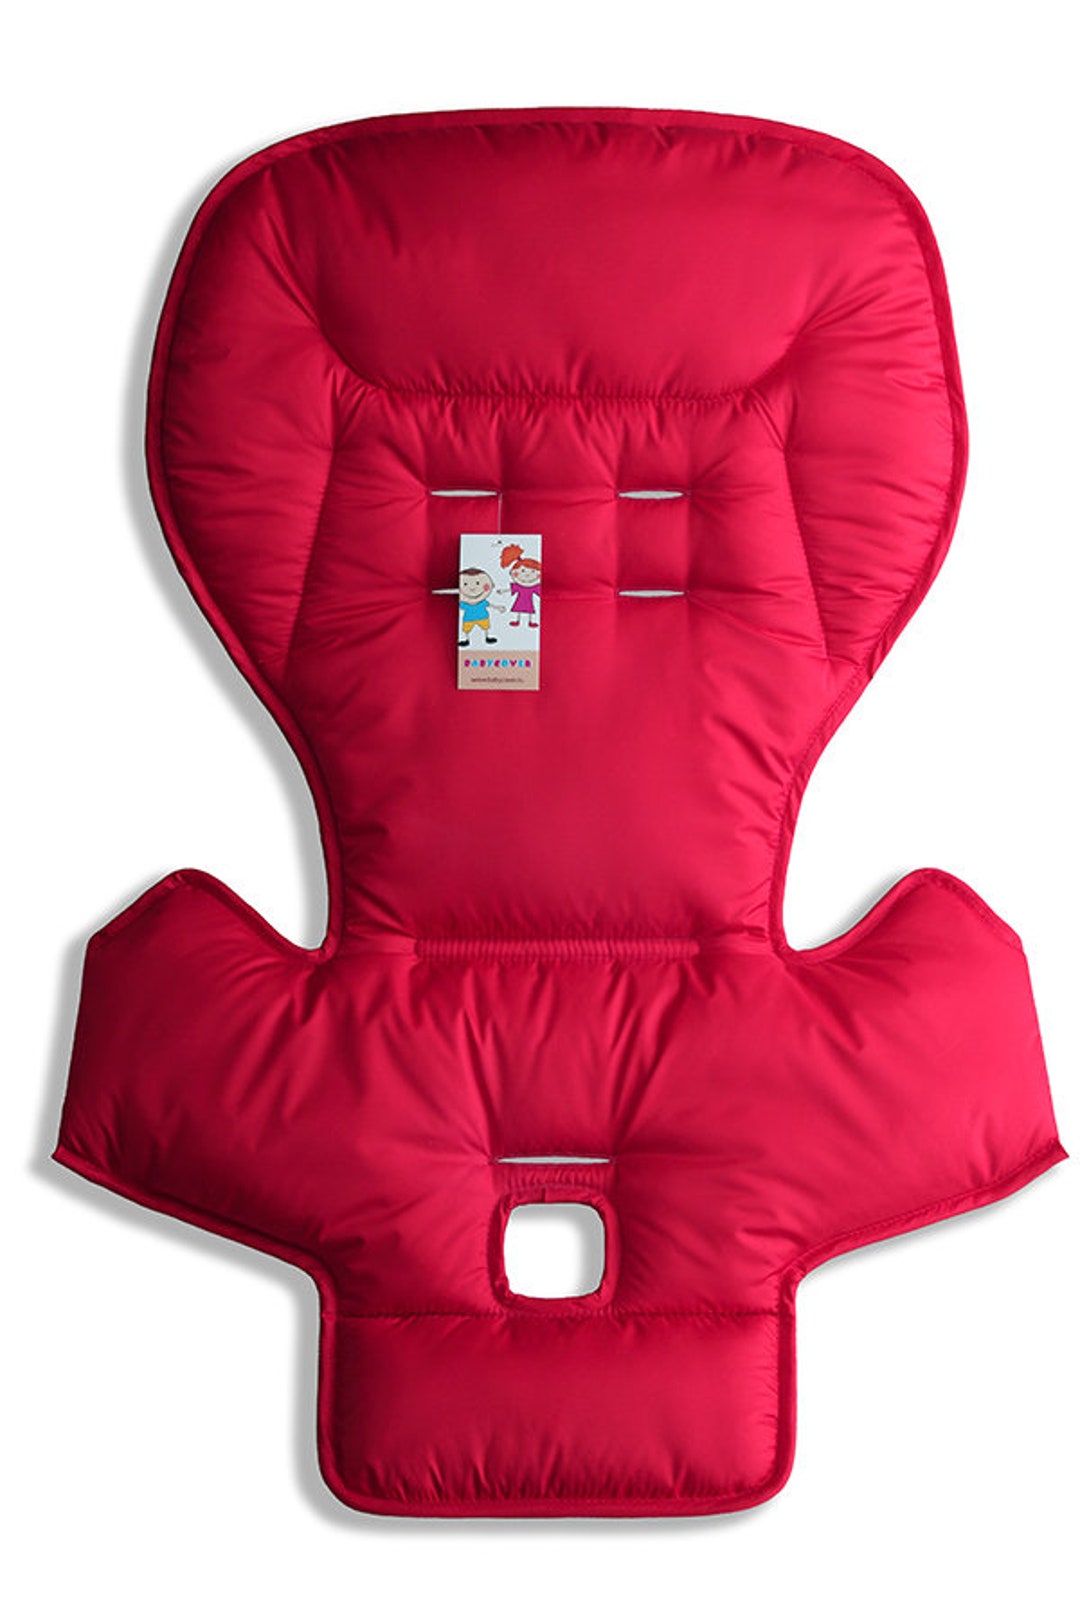 Mamas Papas Peg Perego Highchair Upholstery Seat Cover for Prima